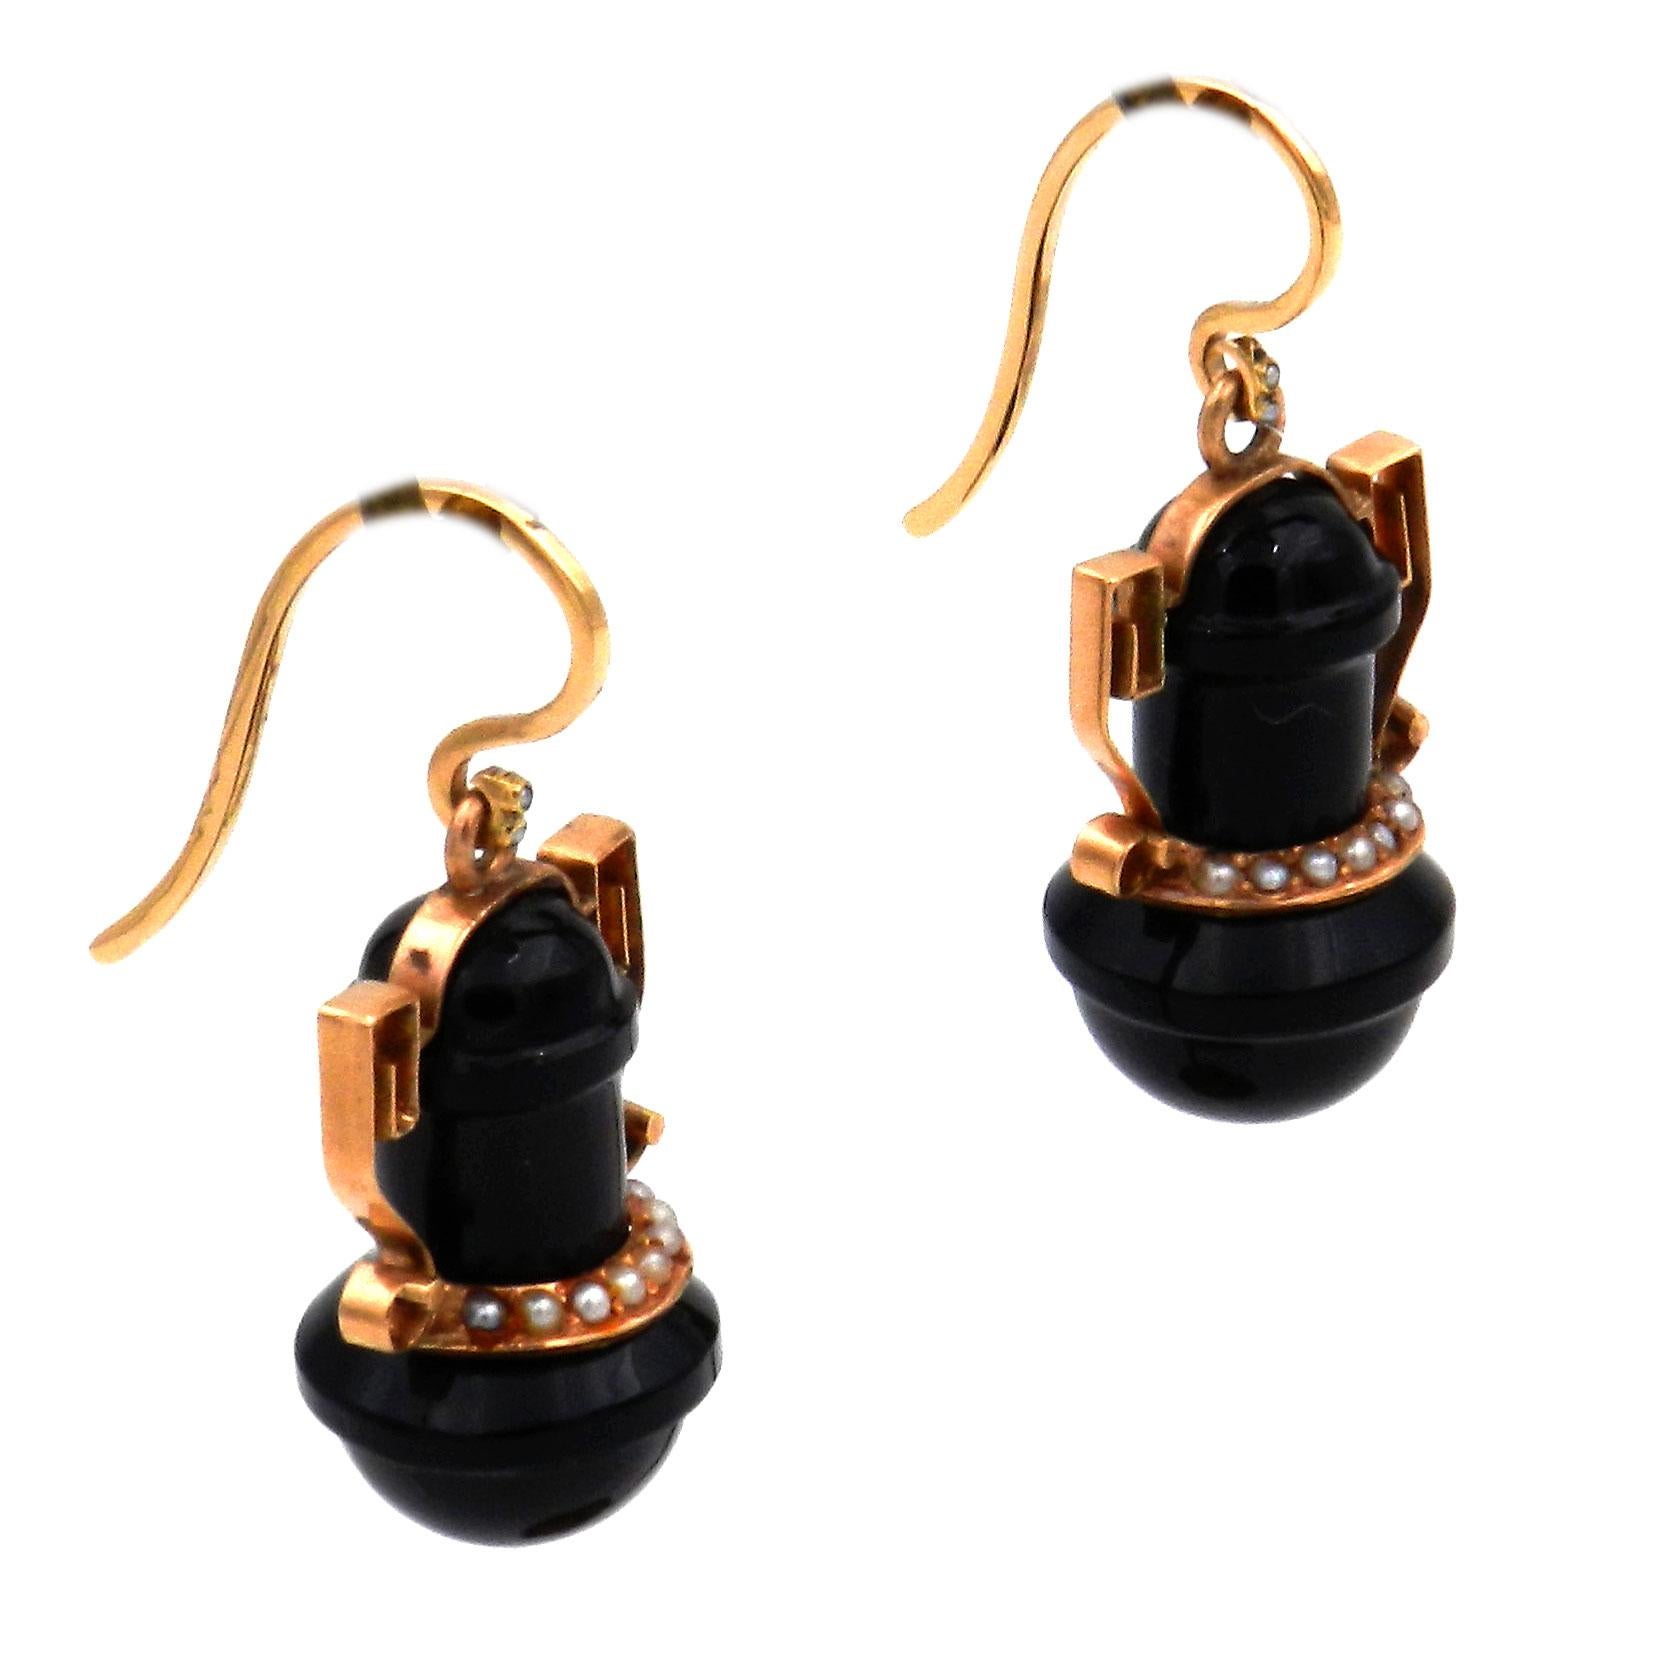 Victorian Onyx Seed Pearl 14K Rose-Gold Earrings, circa 1870

Decorative onyx earrings designed as an antique urn on a long rose-gold swan-neck hook, suspending a flexibly mounted, urn-shaped onyx teardrop with golden handles, highlighted by a band